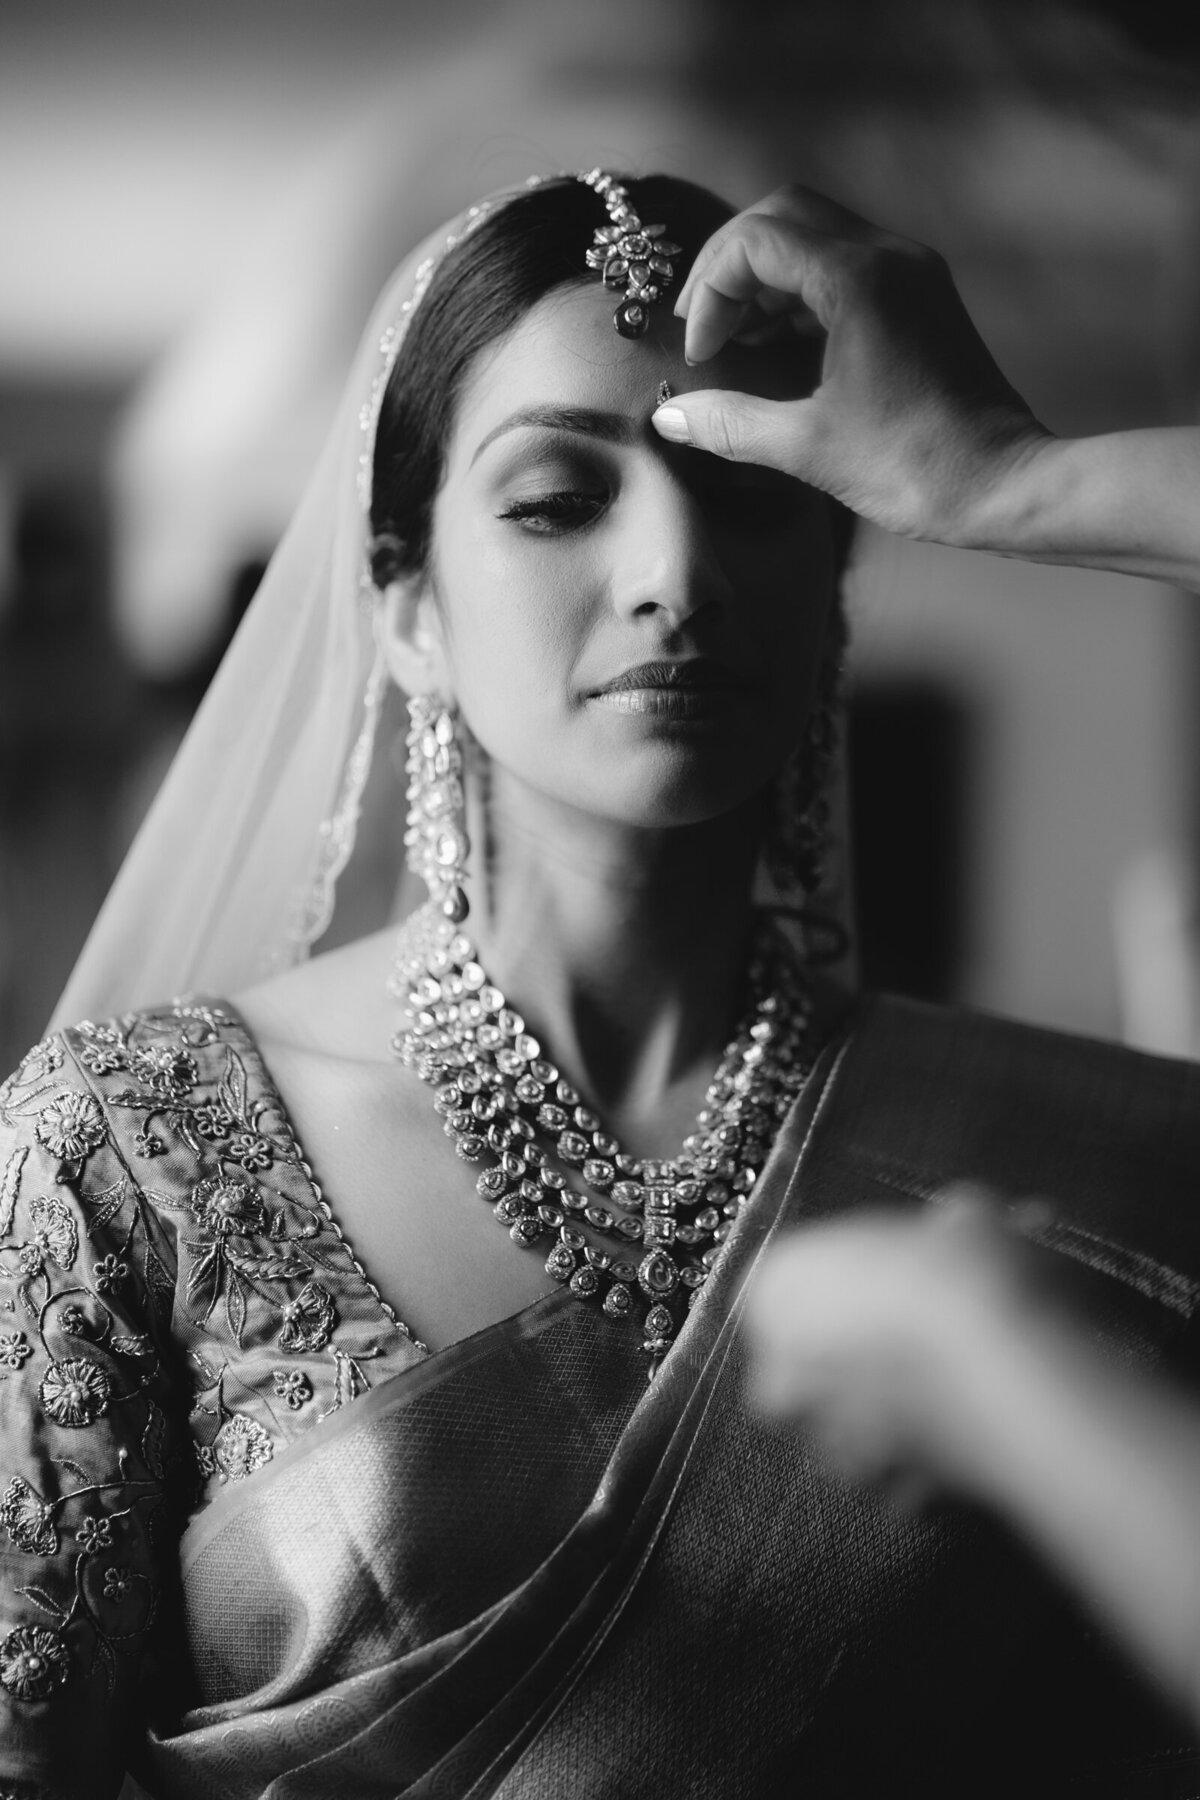 A black and white portrait of a South Asian bride, her expression serene as a hand adorns her with traditional bridal jewelry.